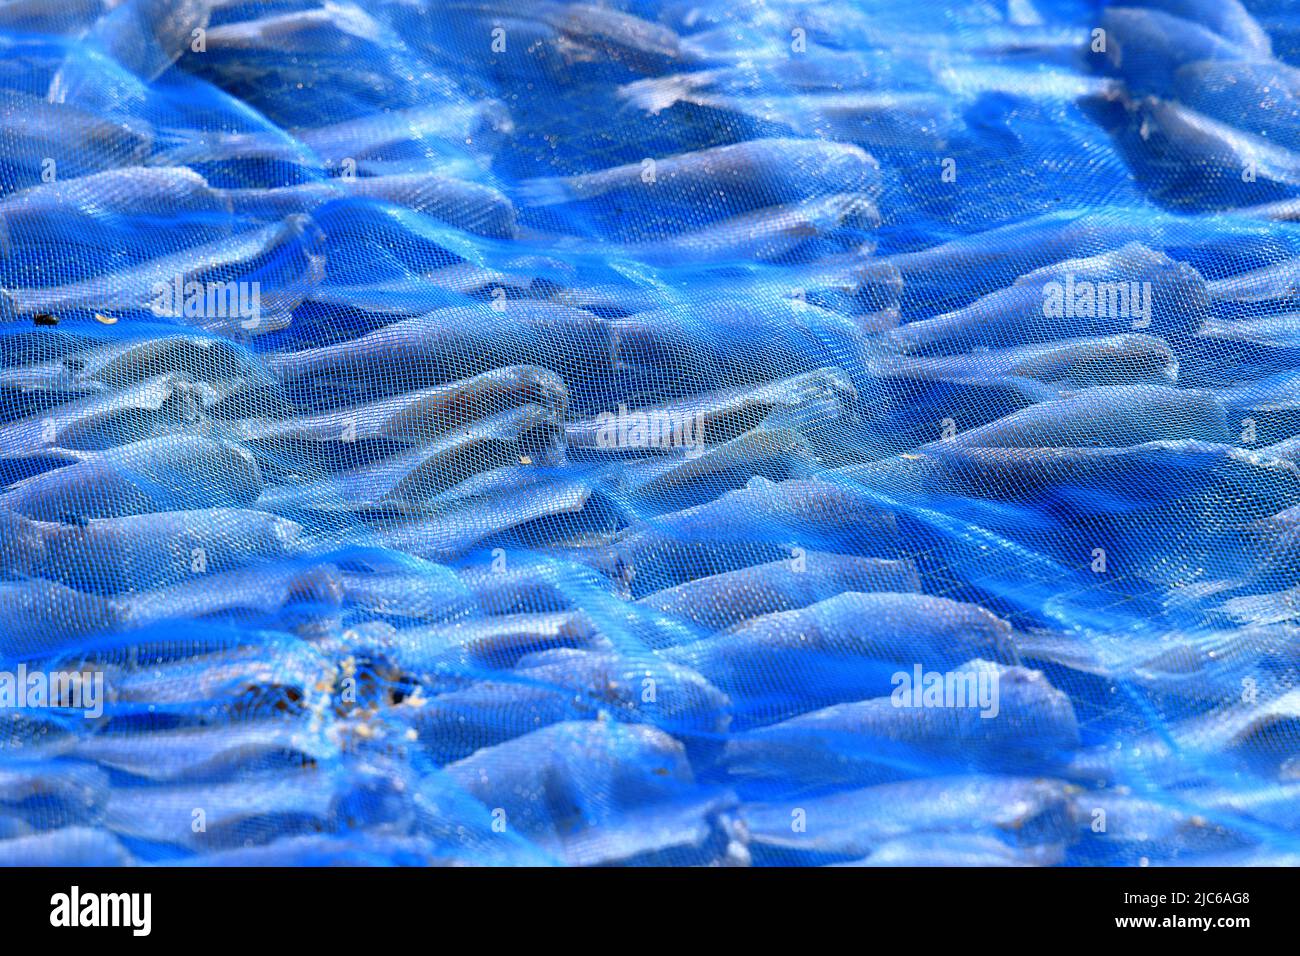 Blue net to cover fish from flies and dust, close up sun dried fish processing, food preservation Stock Photo